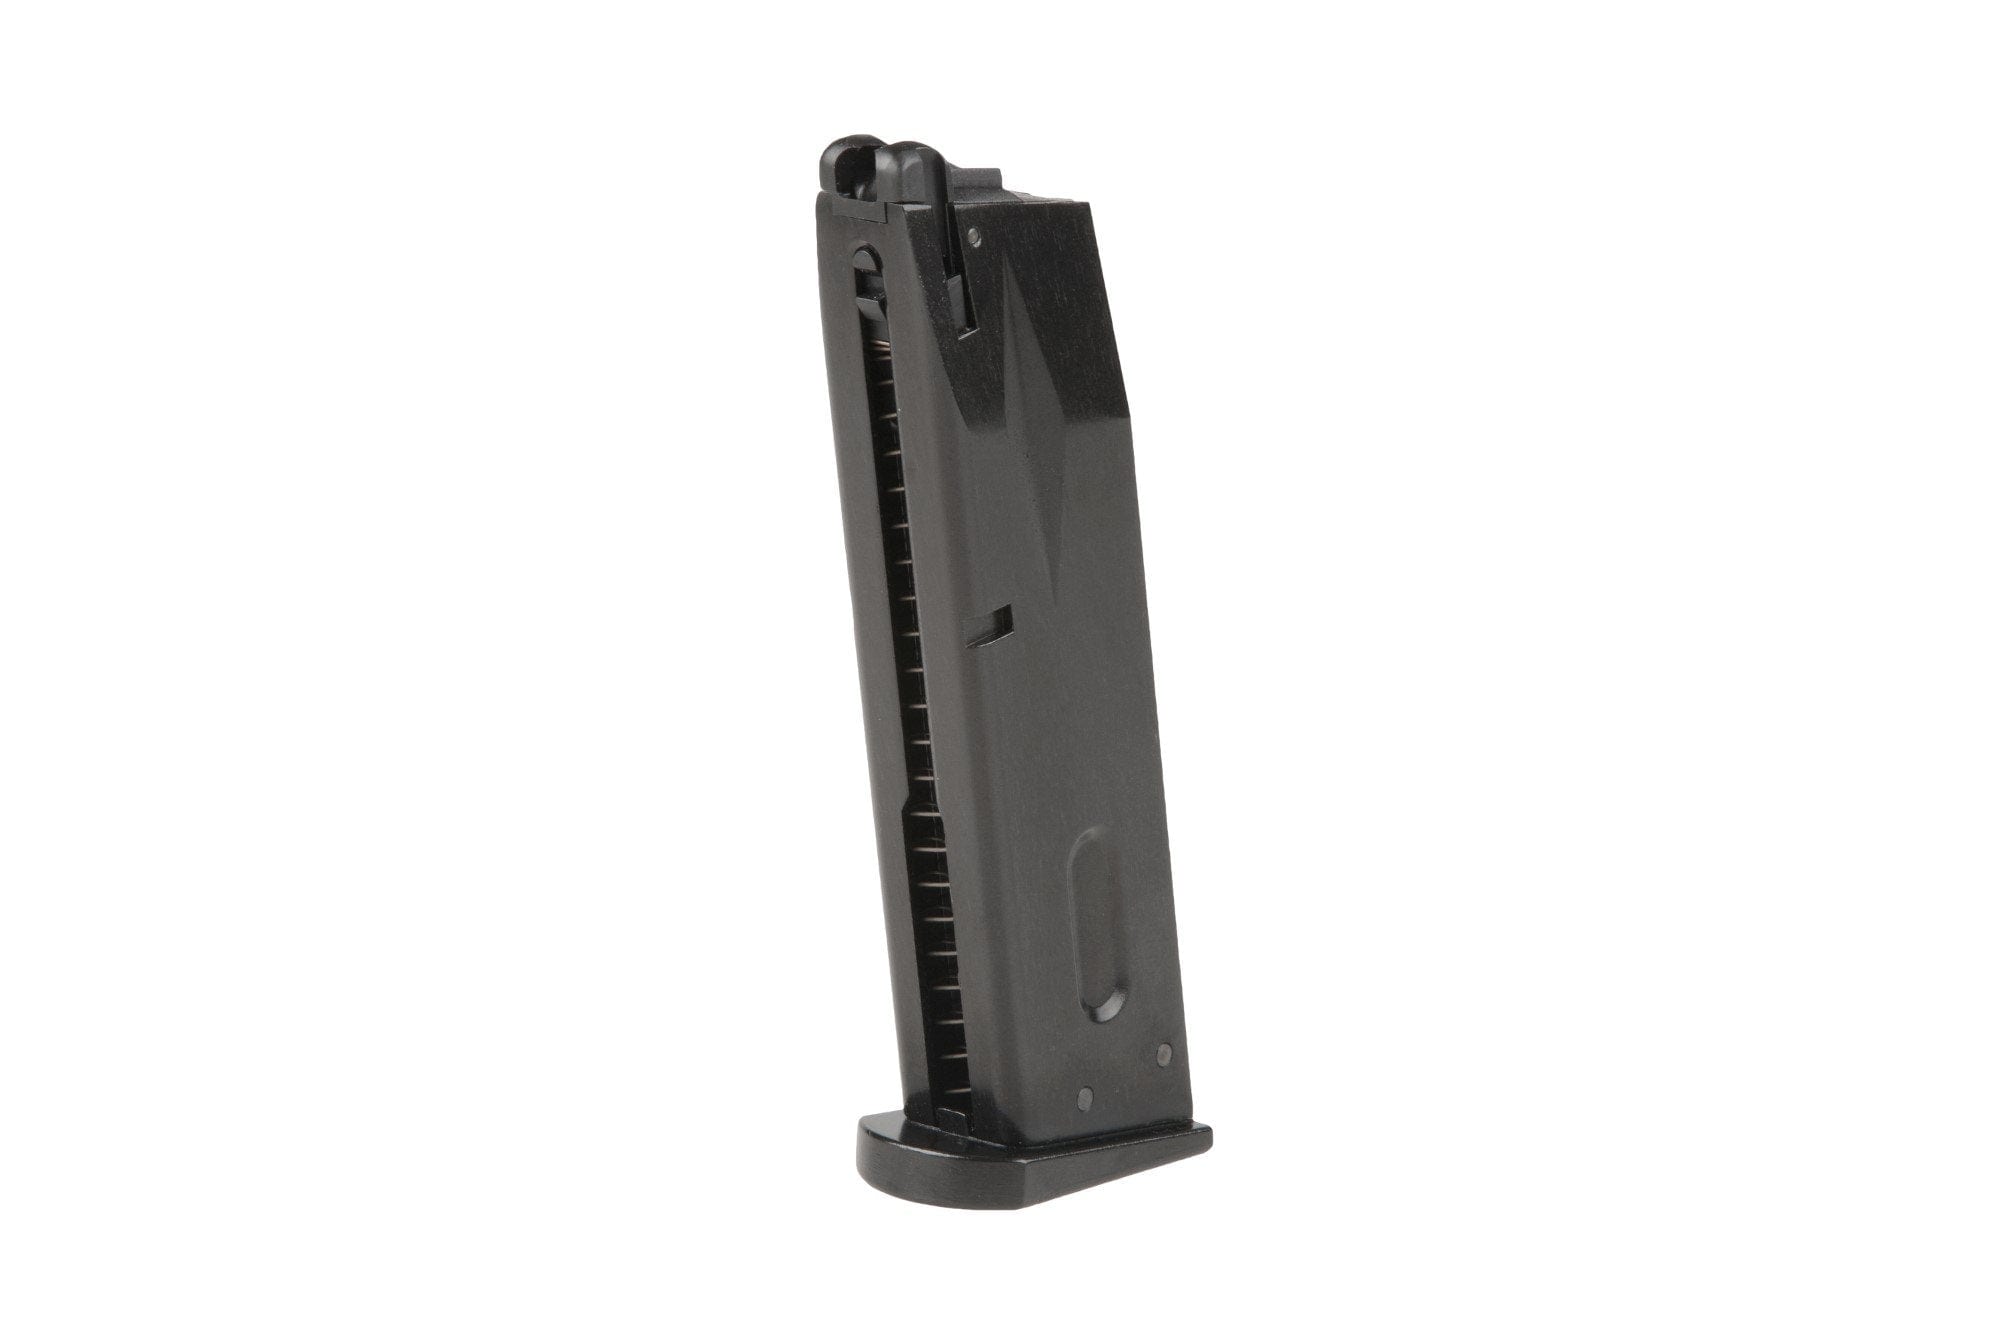 Low-Cap 25 BB Gas Magazine for WE M9/M92F Replicas - Black by WE on Airsoft Mania Europe